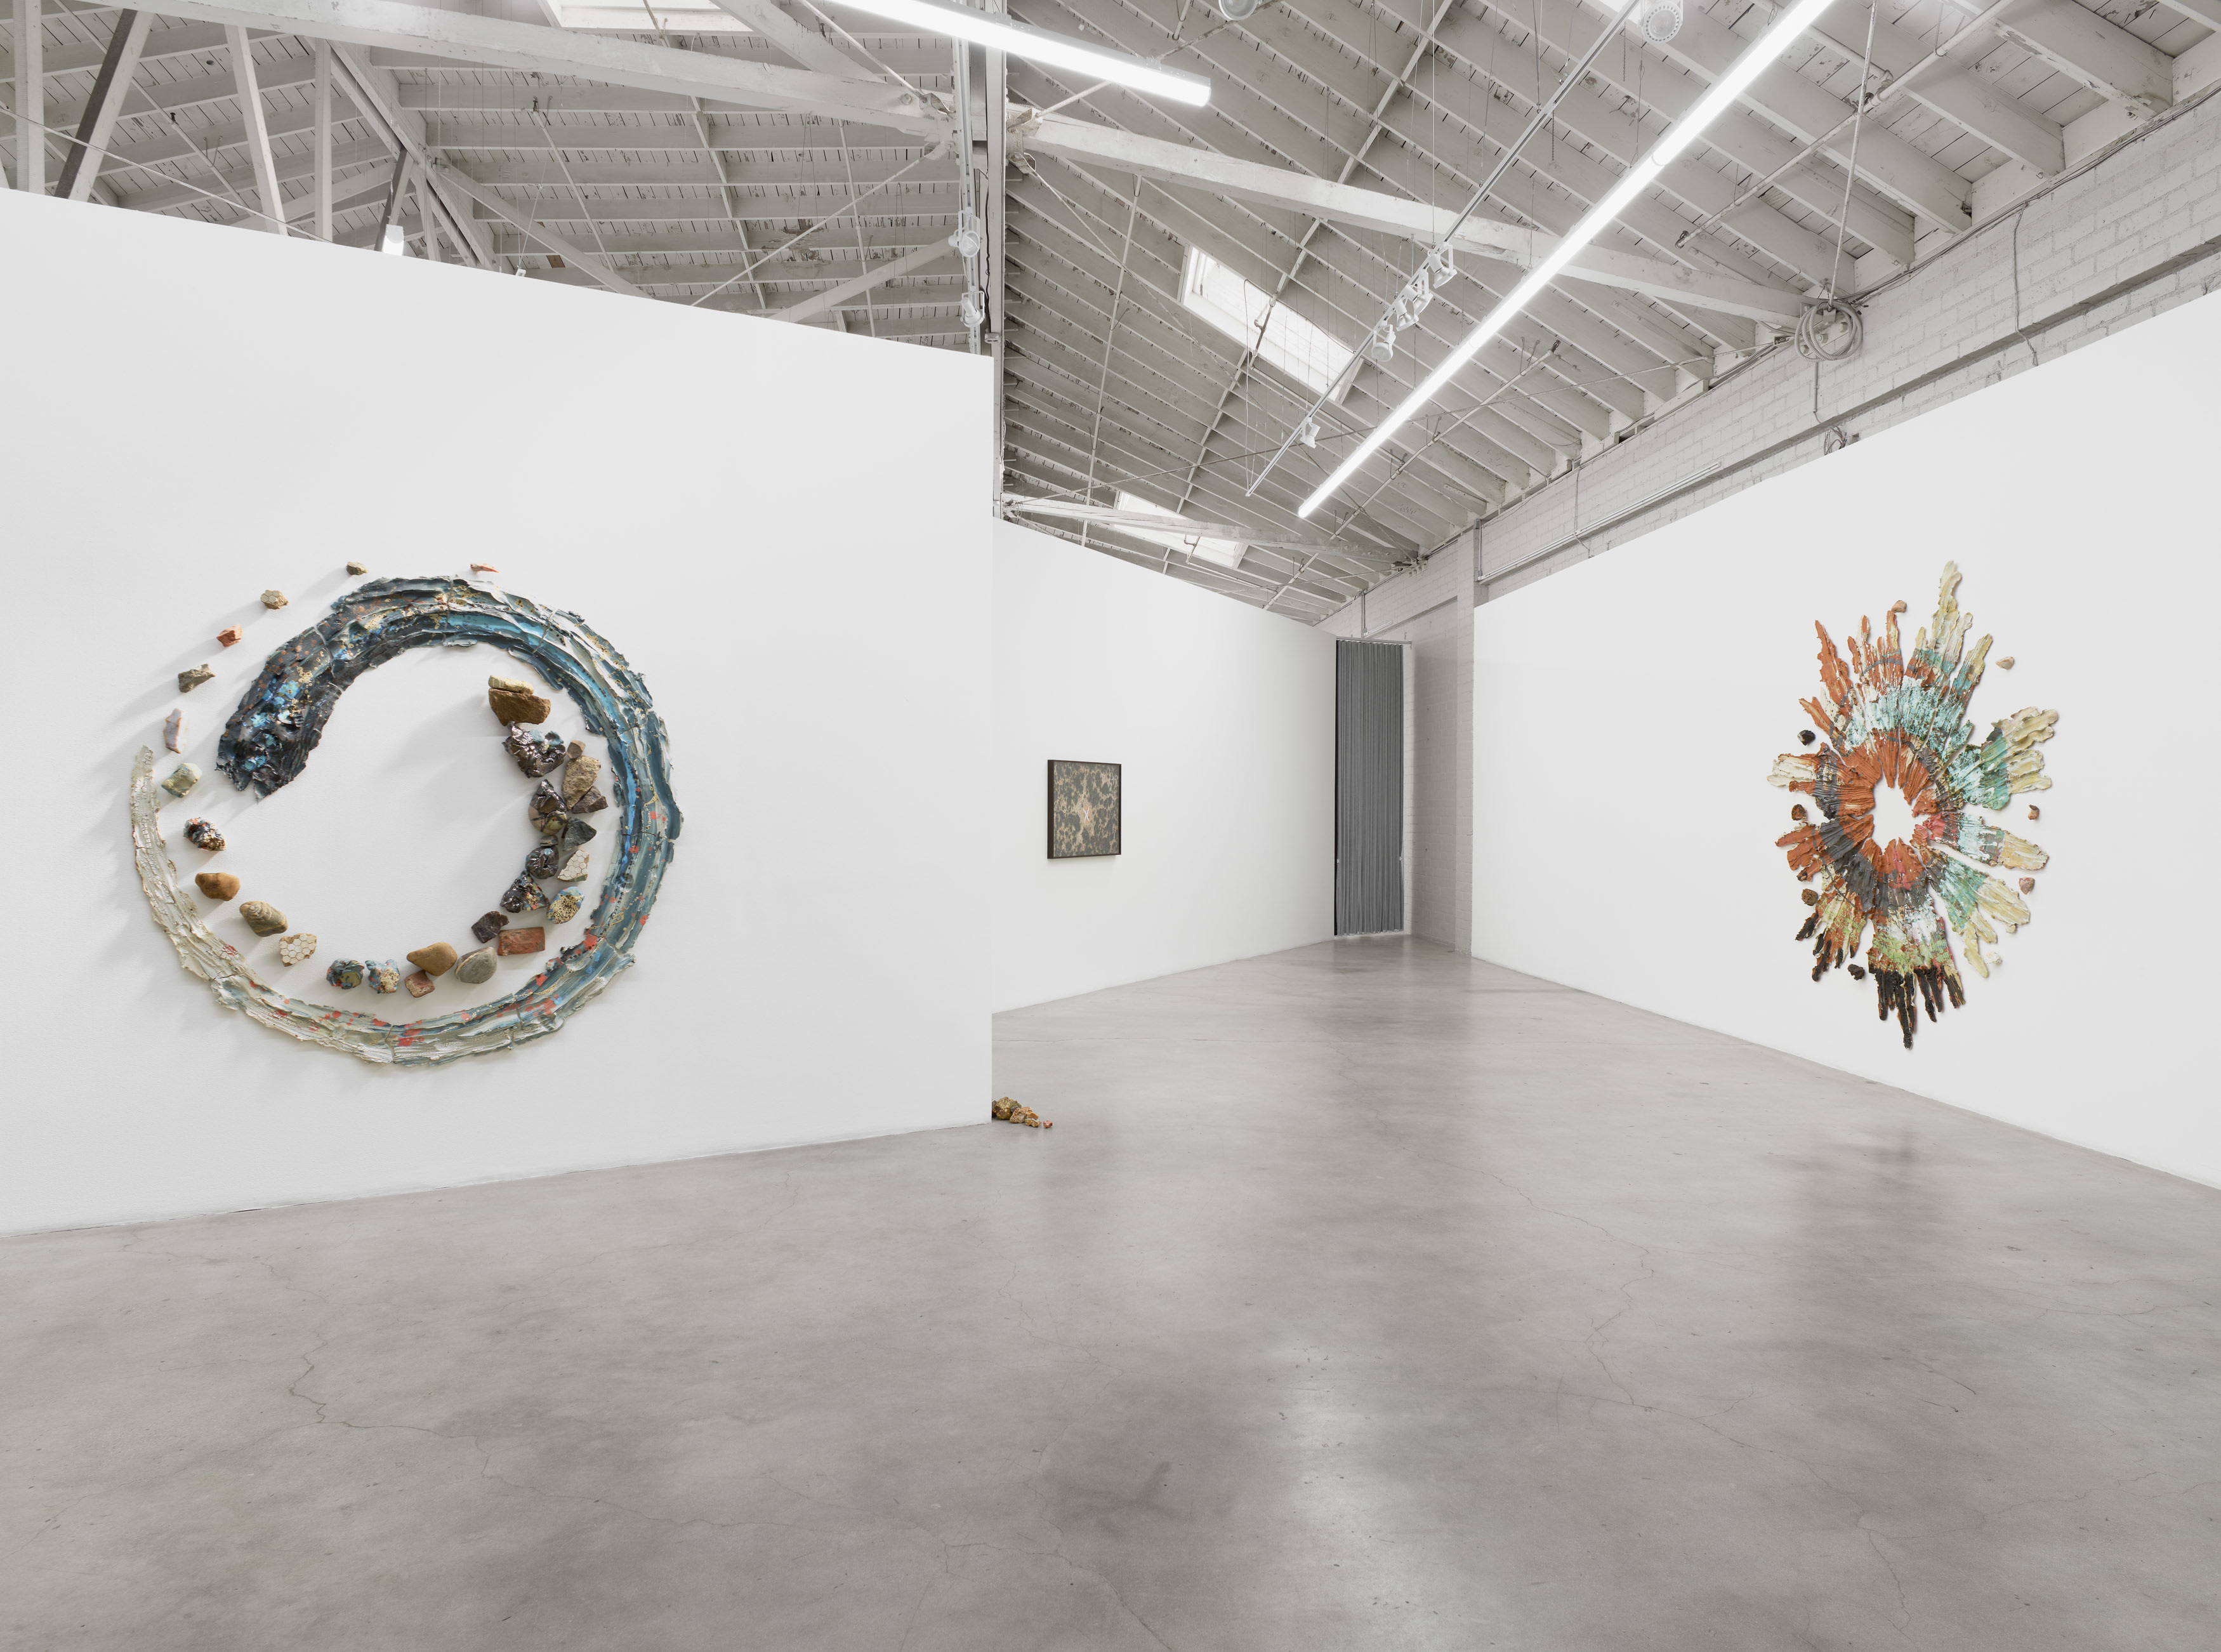 Installation view of Spiraling Open and Closed Like an Aperture, 2020